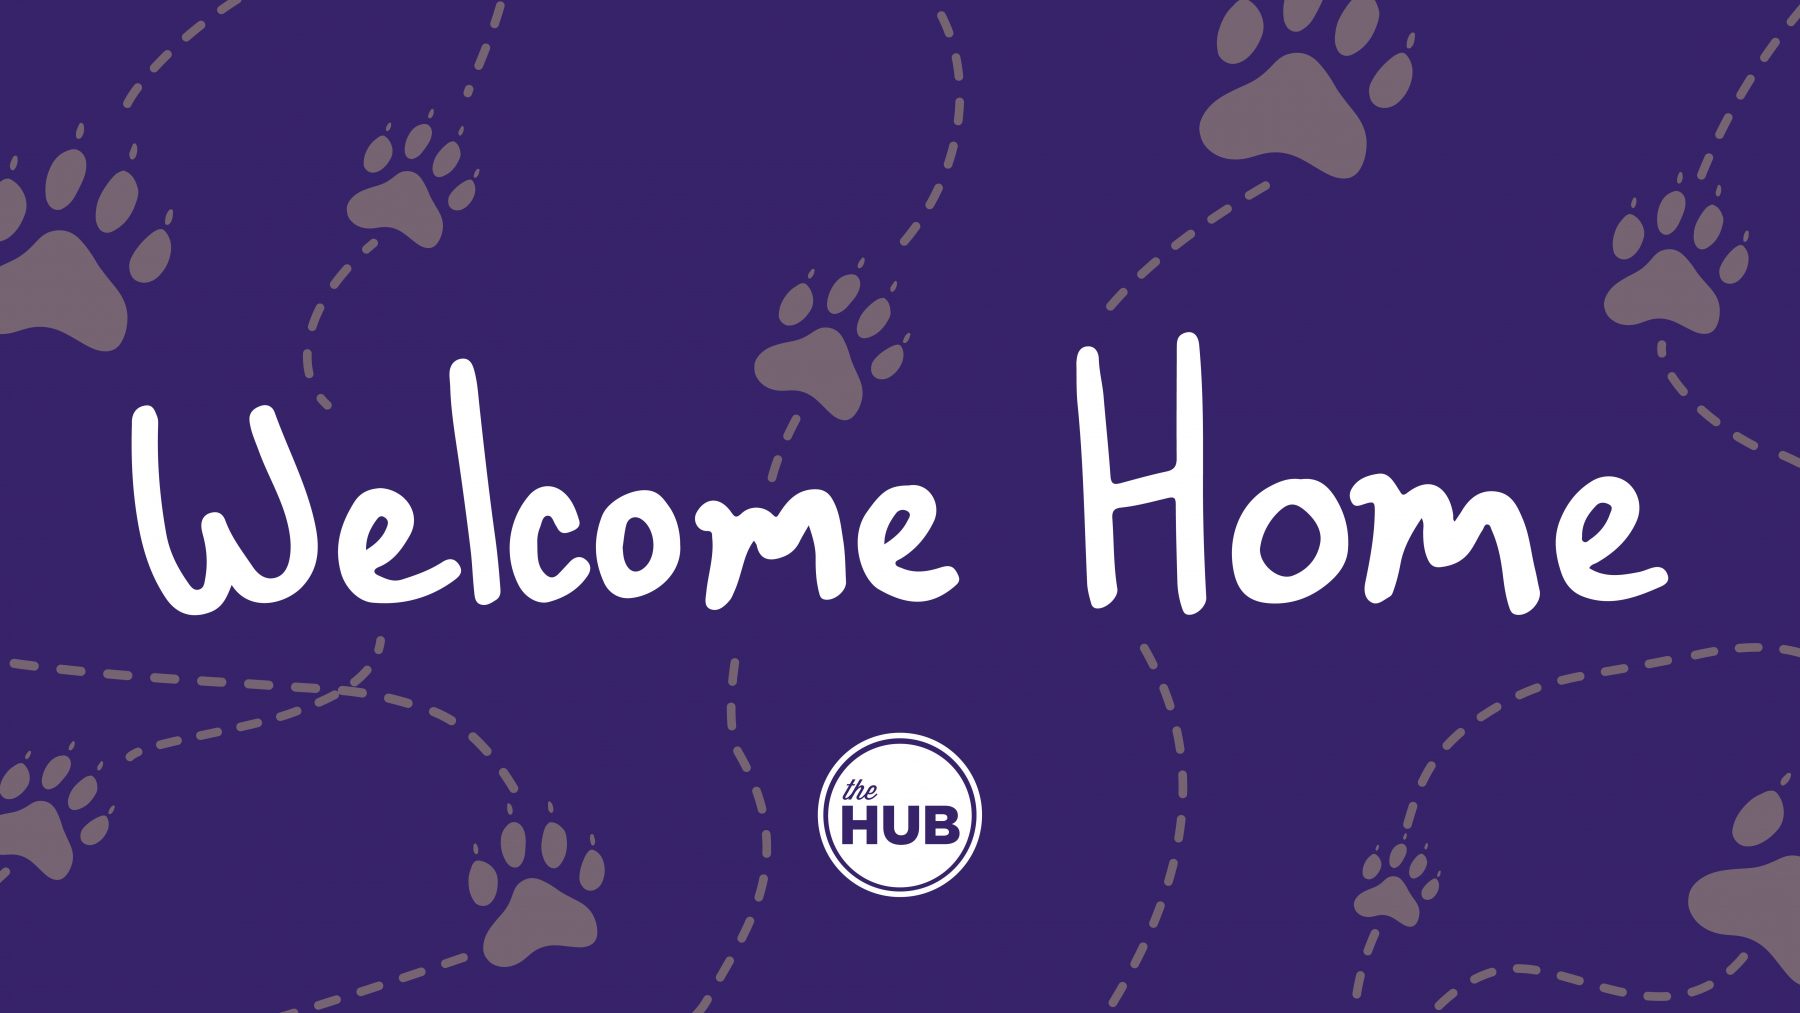 An image welcoming you home to the HUB!